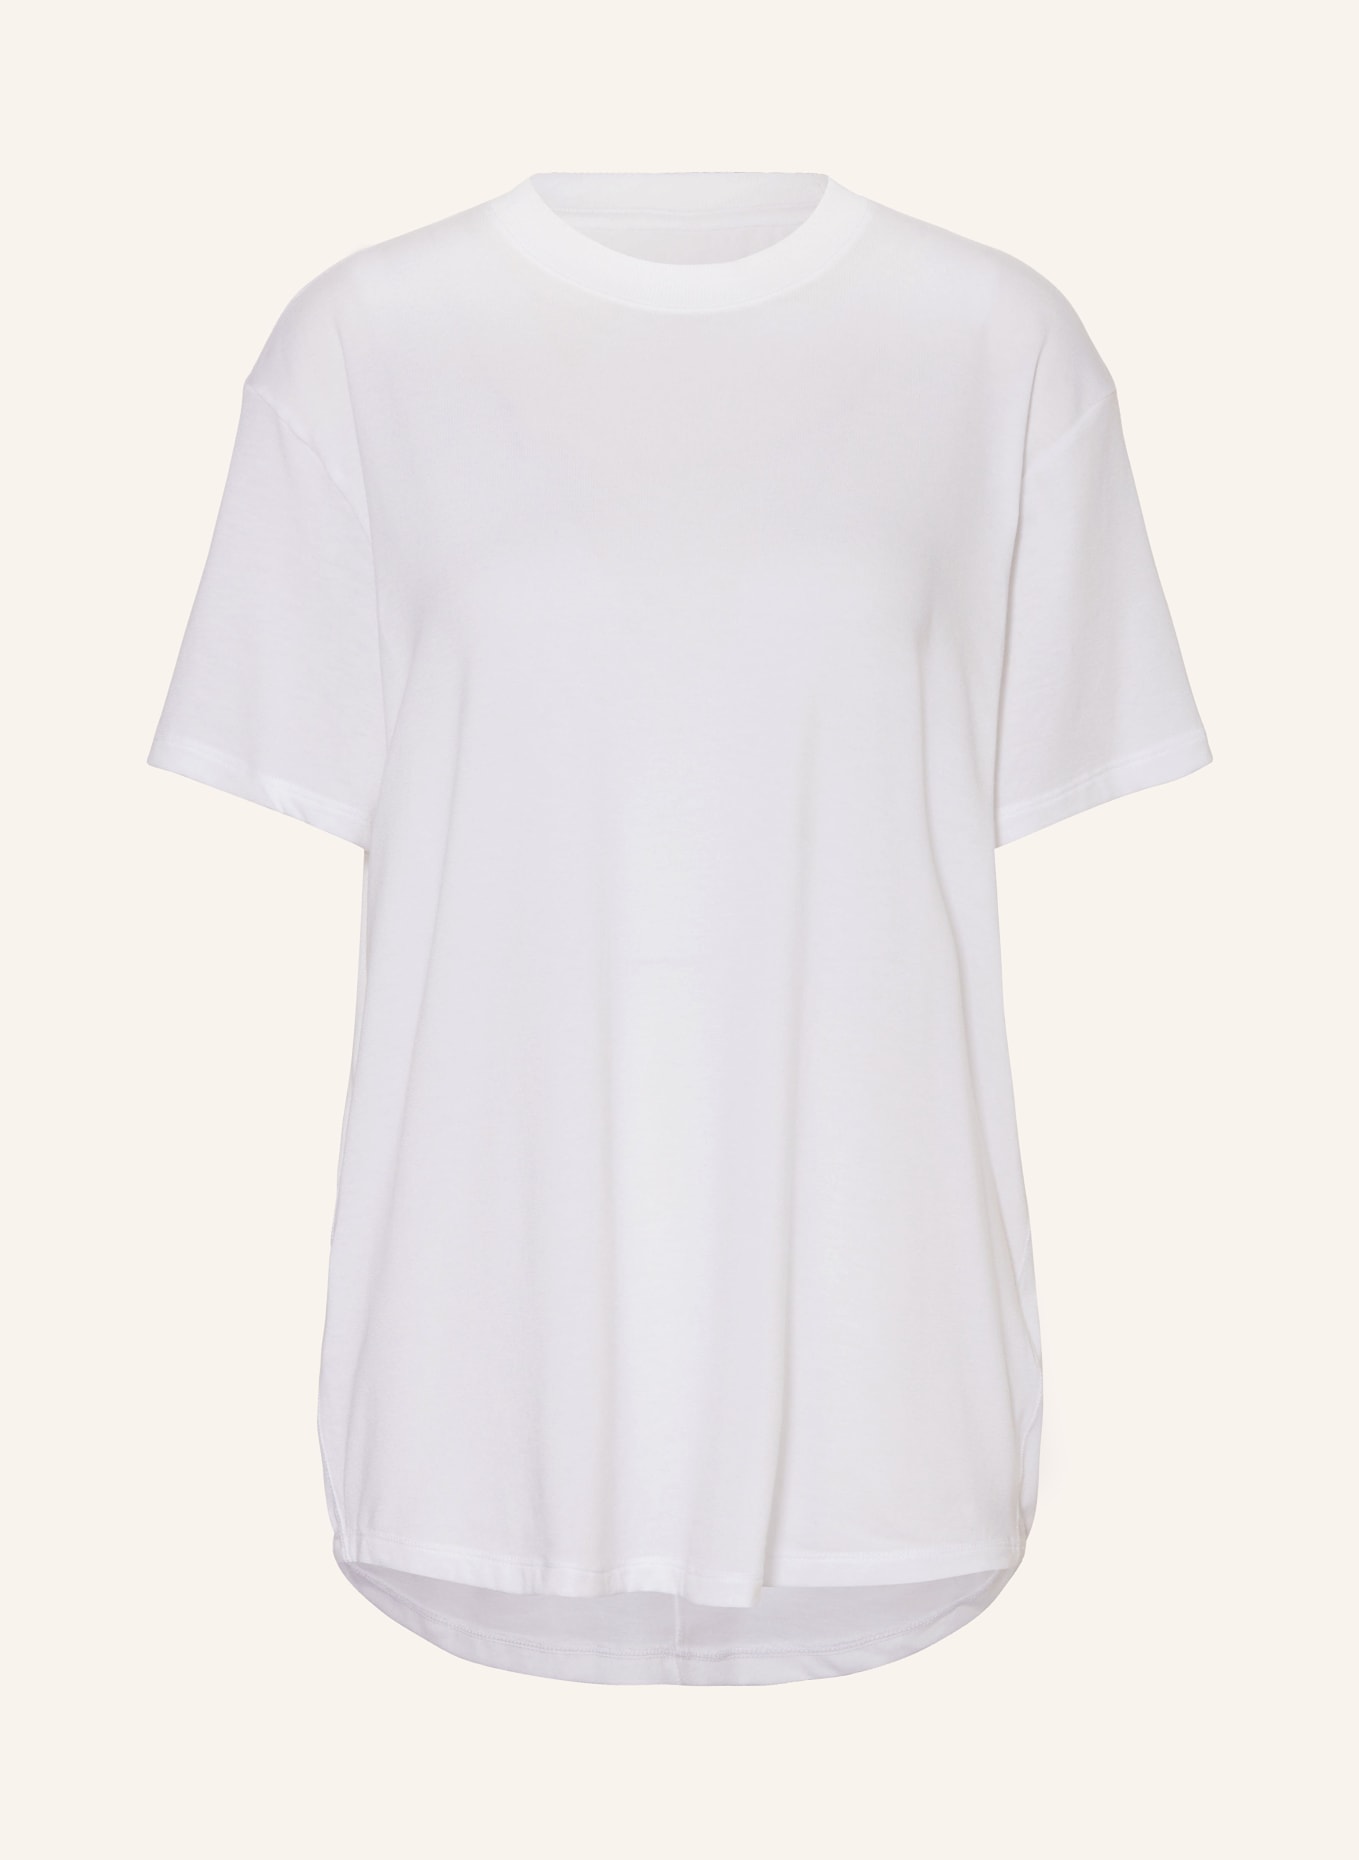 Nike T-Shirt ONE RELAXED, Farbe: WEISS (Bild 1)